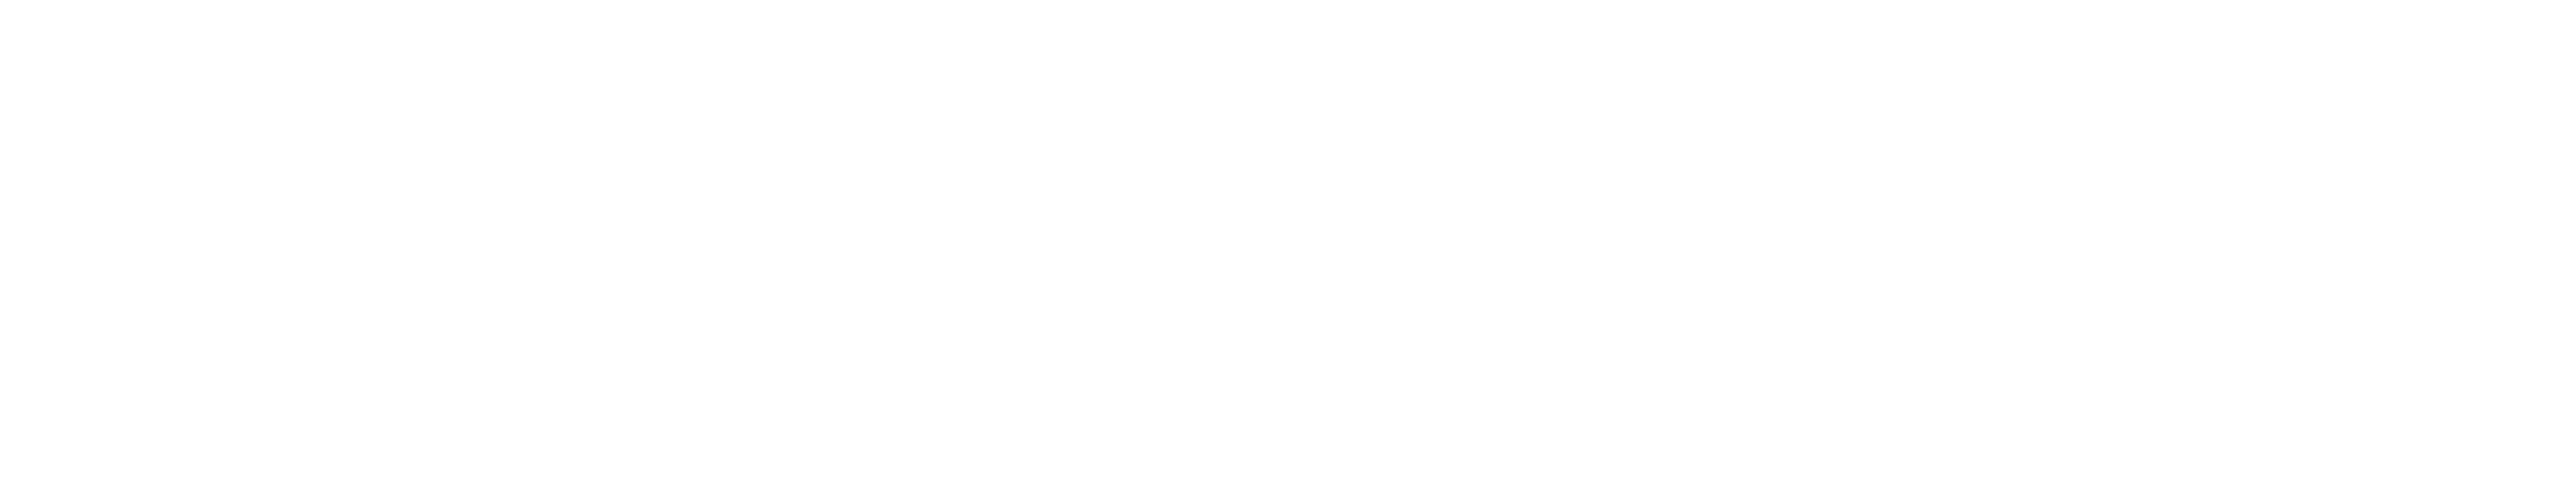 UAB 50th Logo - Shield Only - Greyscale with White Outline